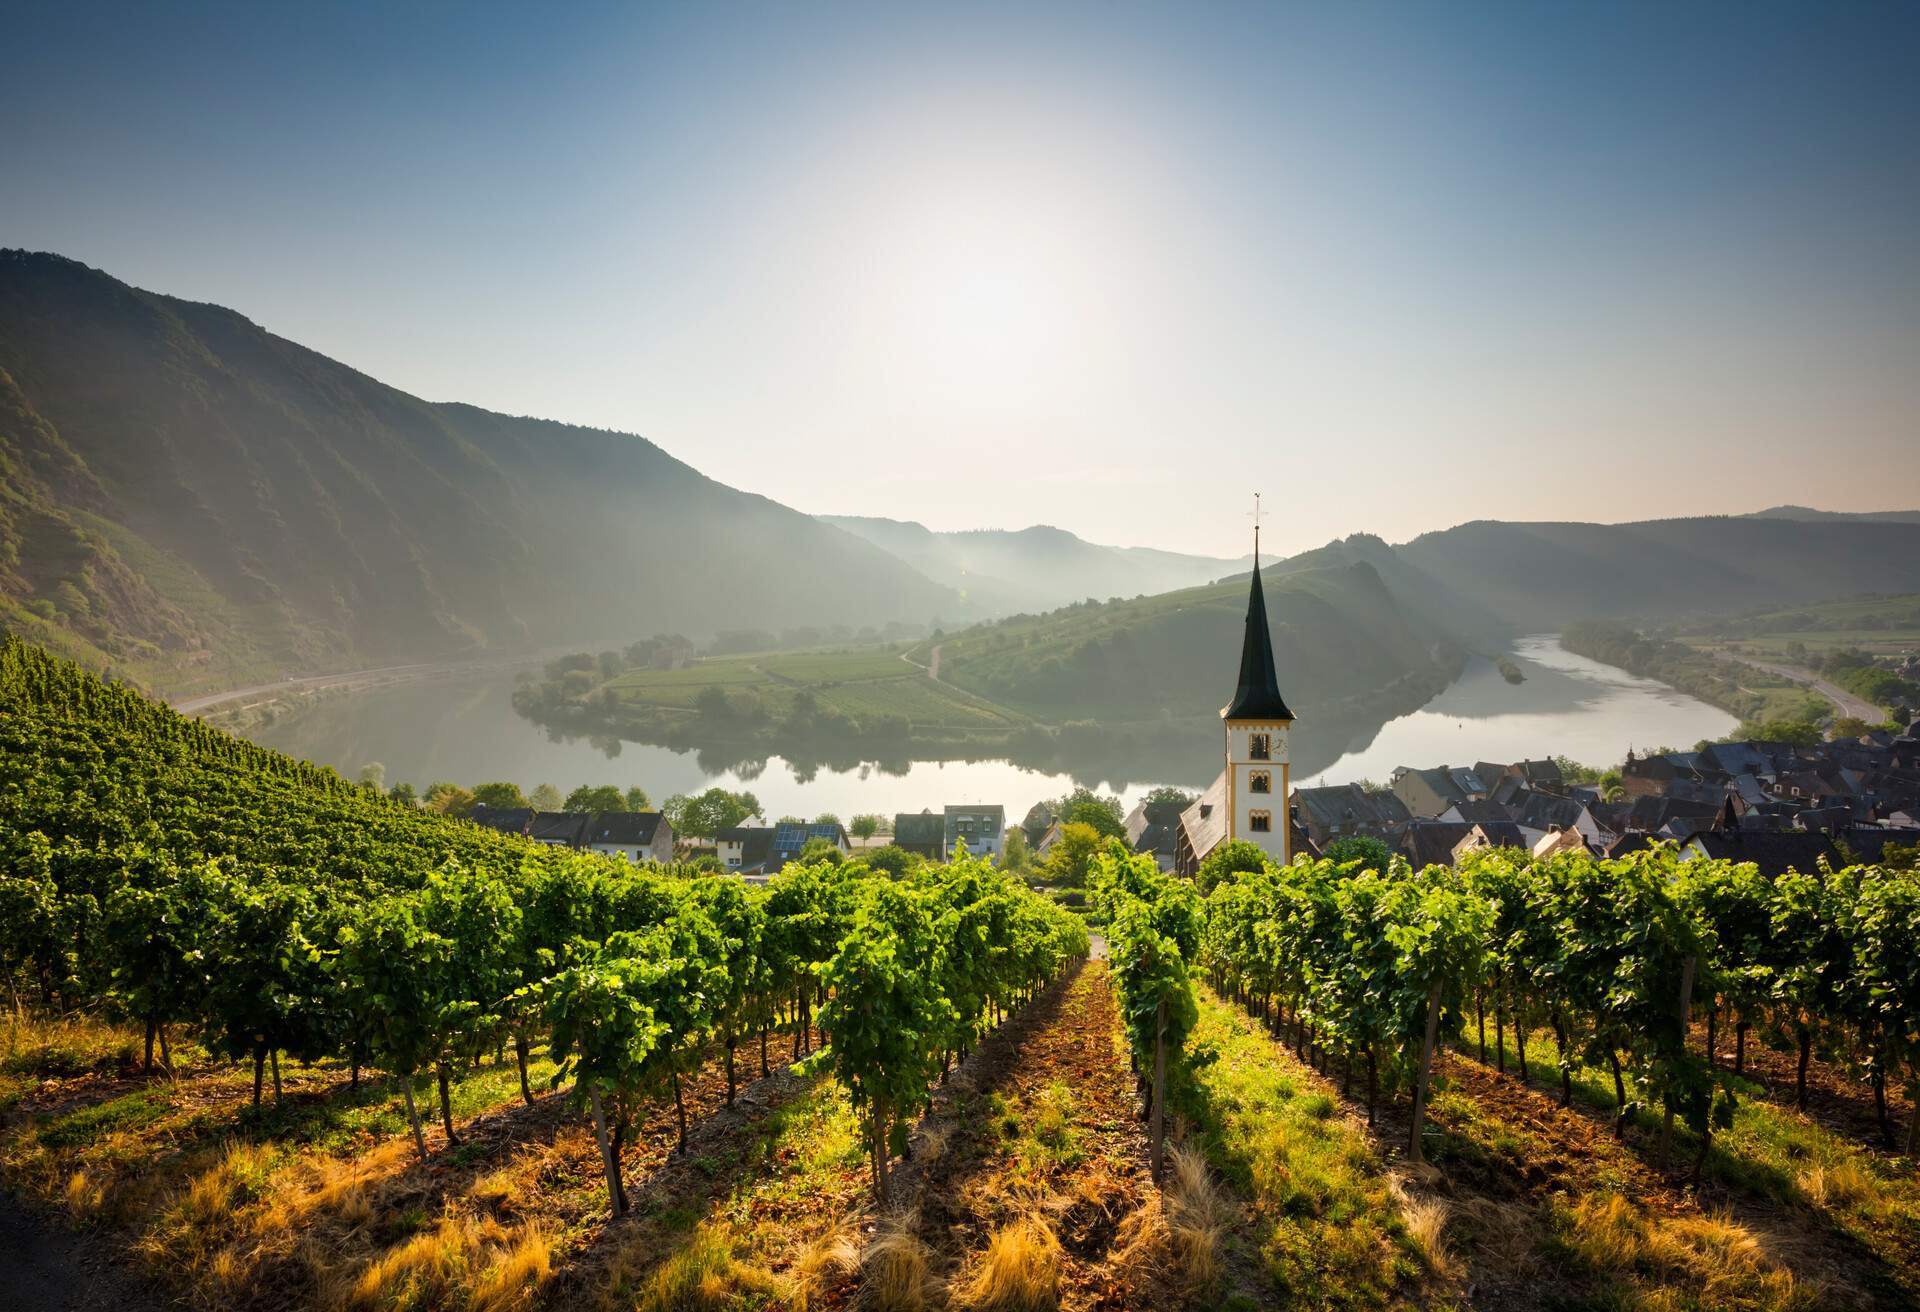 DEST_GERMANY_BREMM_MOSEL_VALLEY_GettyImages-580821455